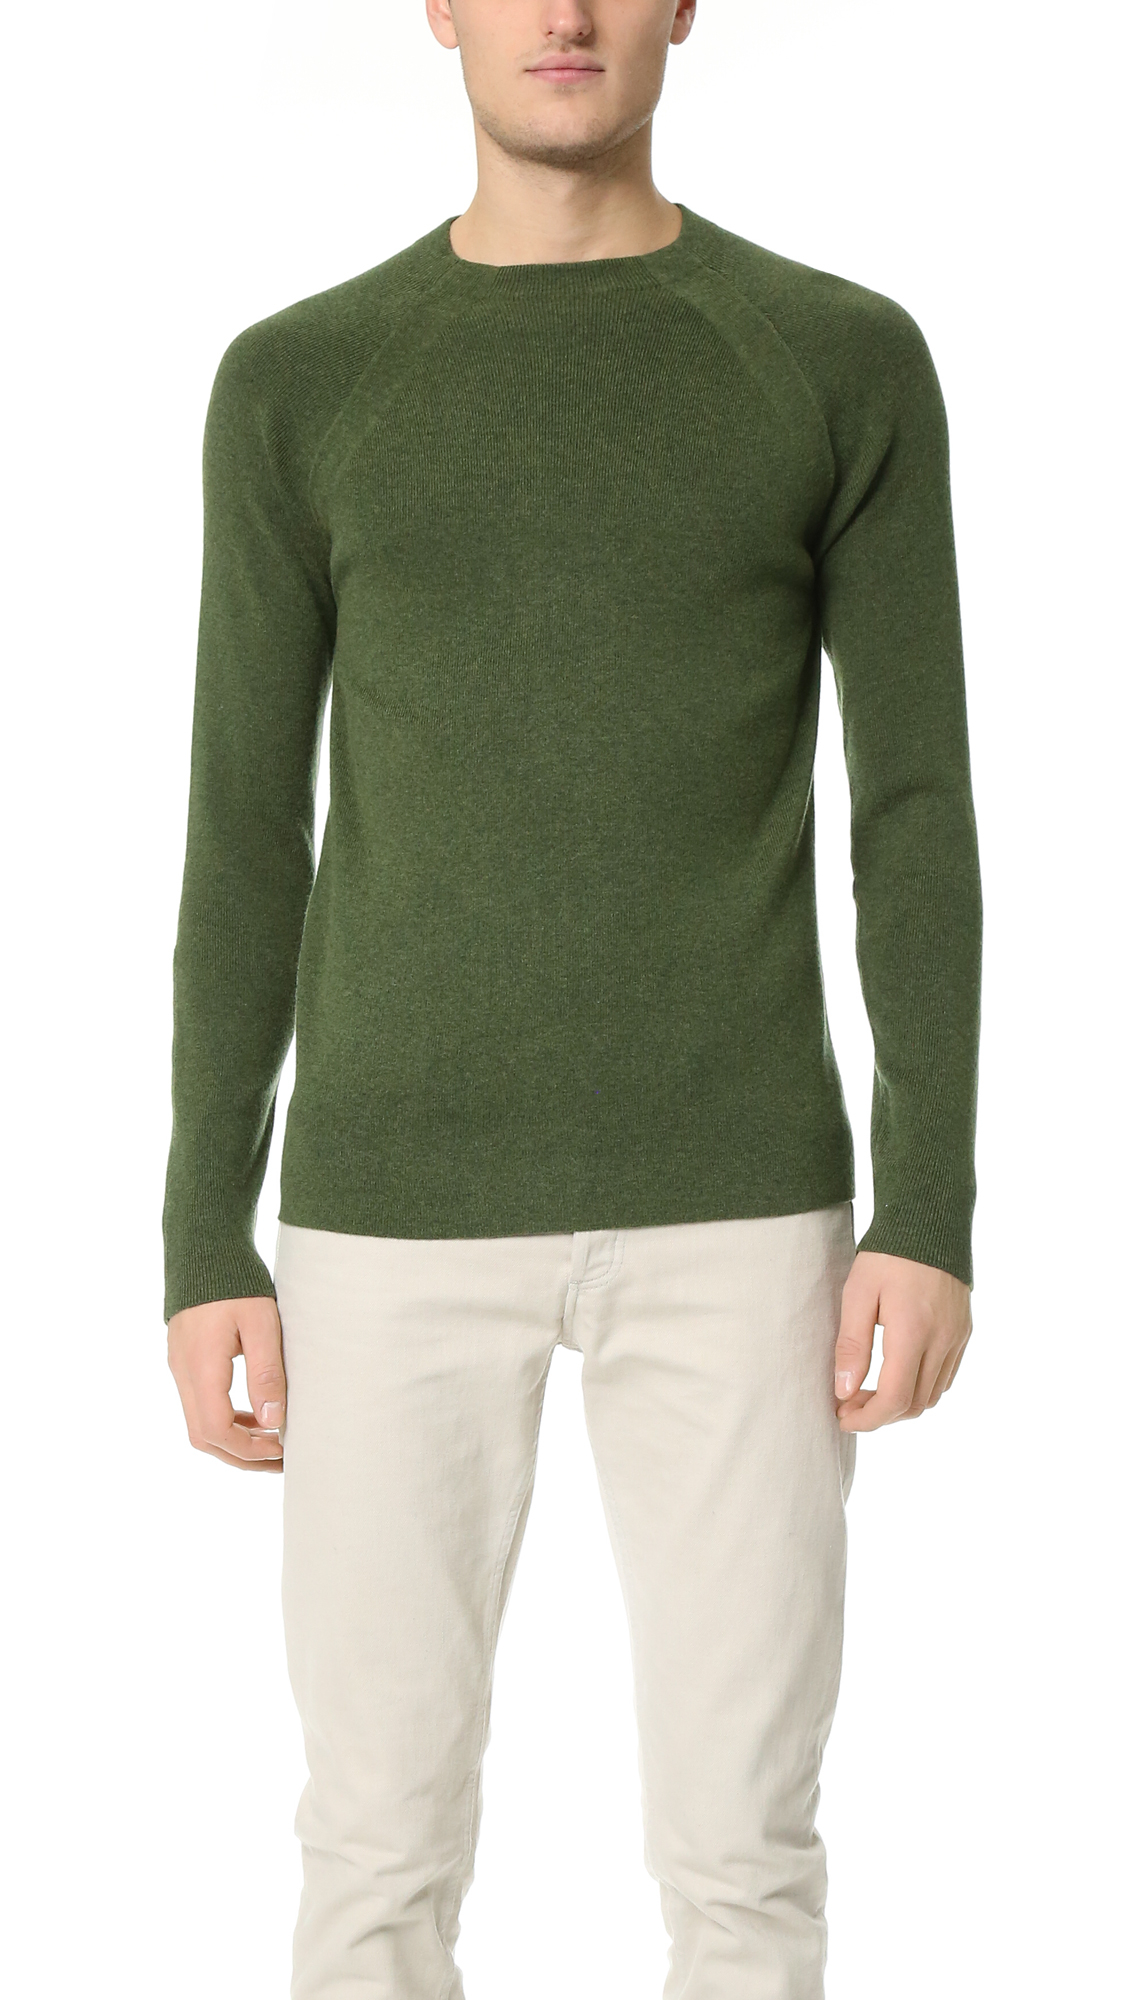 Lyst - Norse Projects Birnir Military Rib Knit Sweater in Green for Men